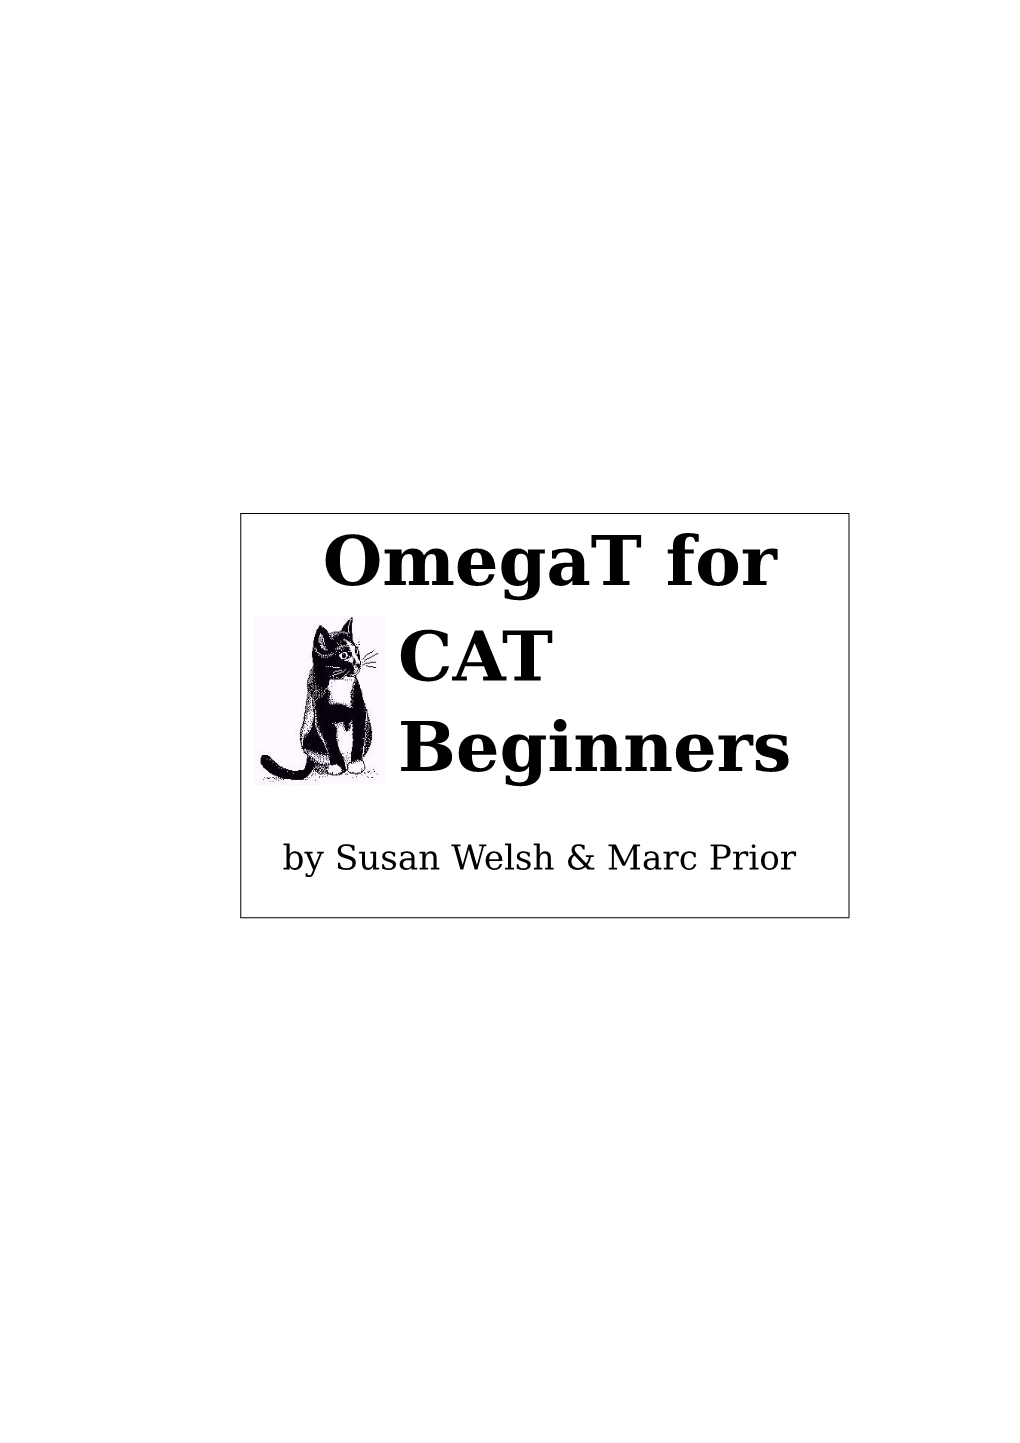 Omegat for CAT Beginners by Susan Welsh & Marc Prior 2